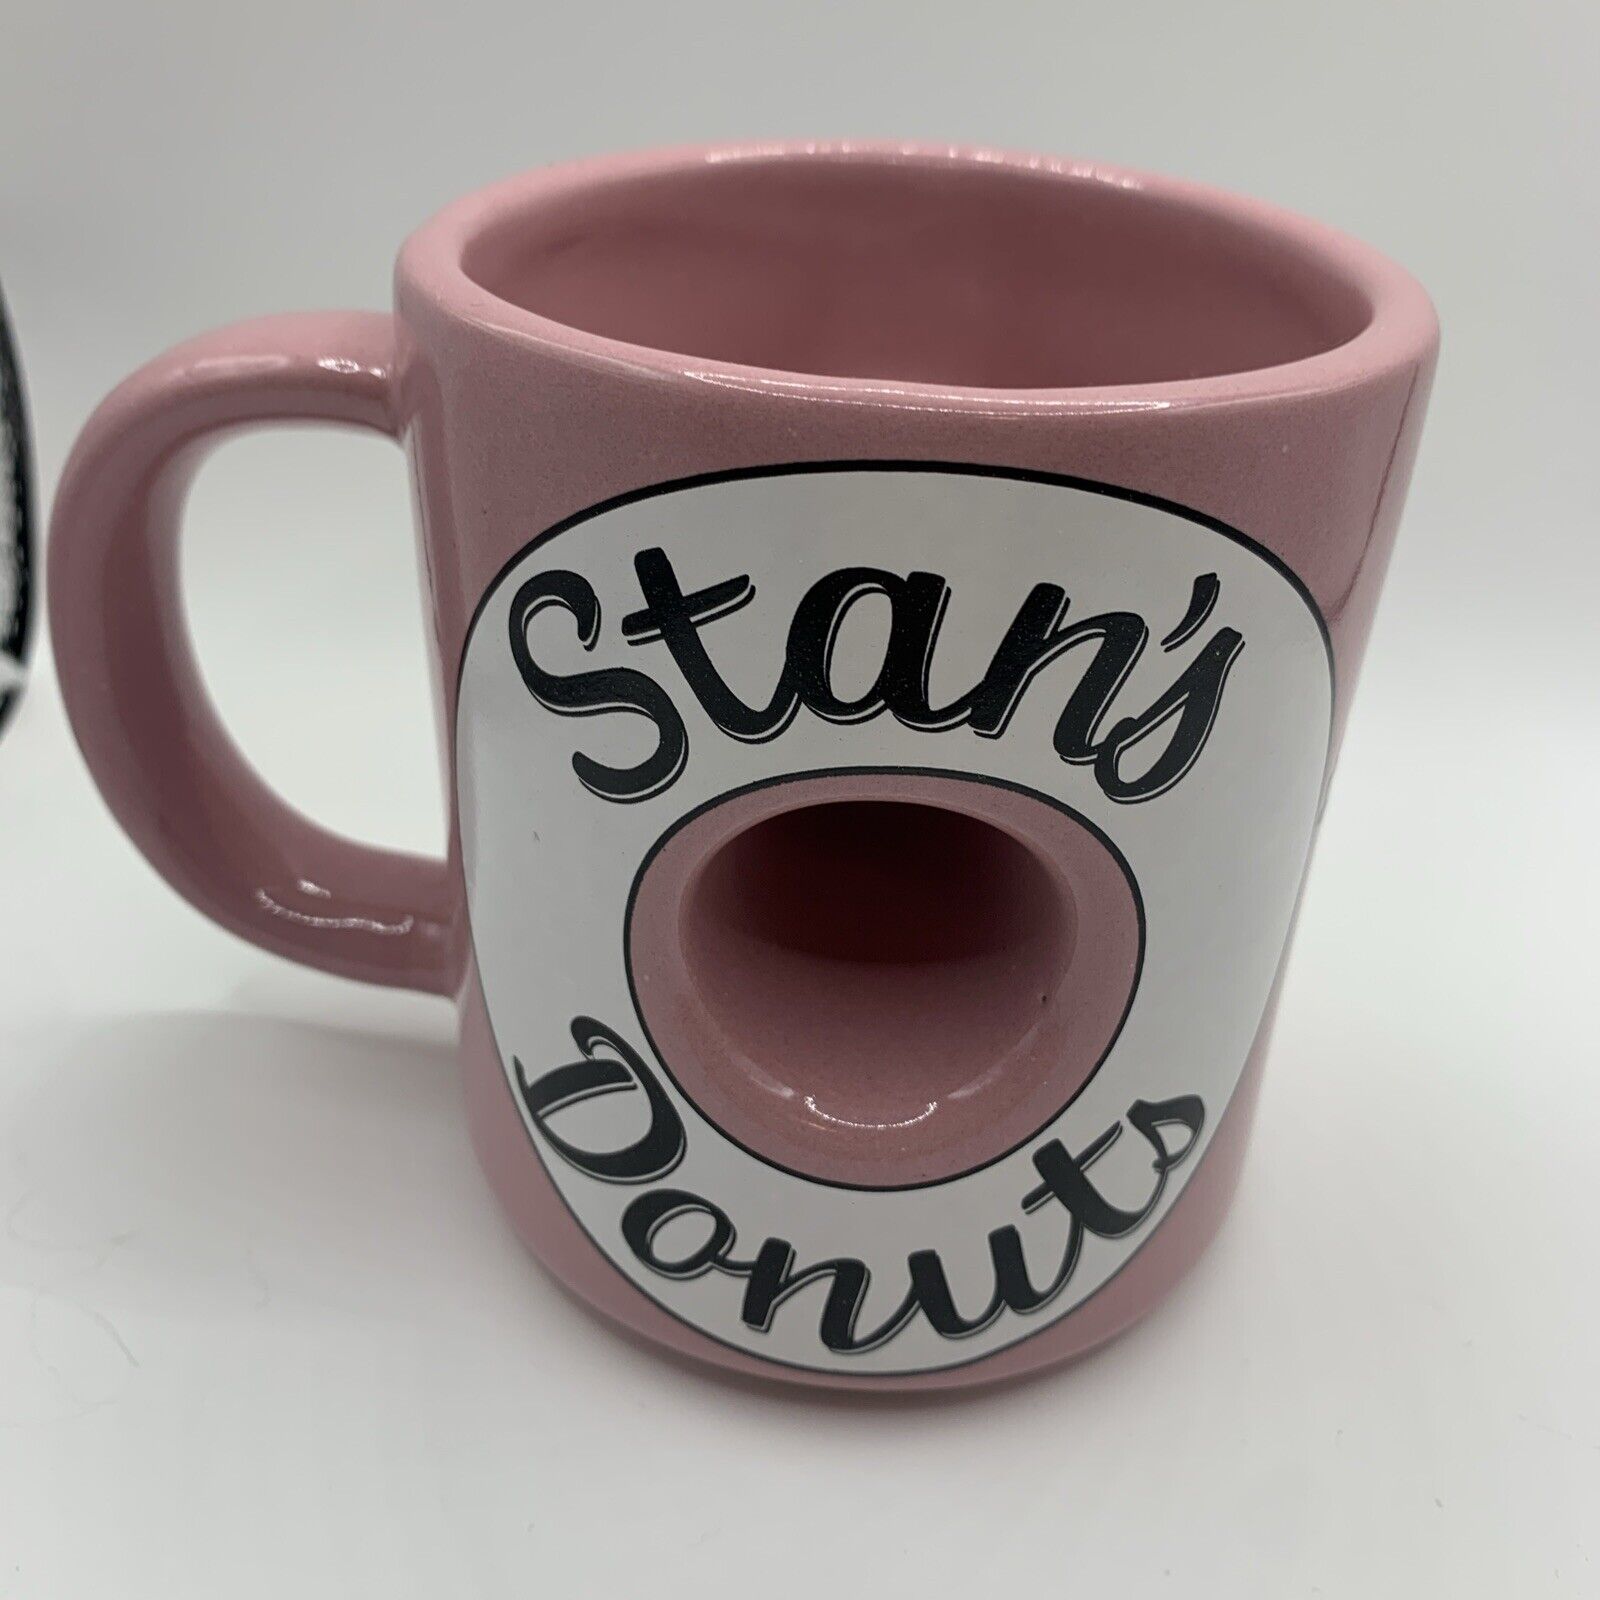 Stans Donuts Coffee Mug Chicago Illinois Pink With Donut Hole